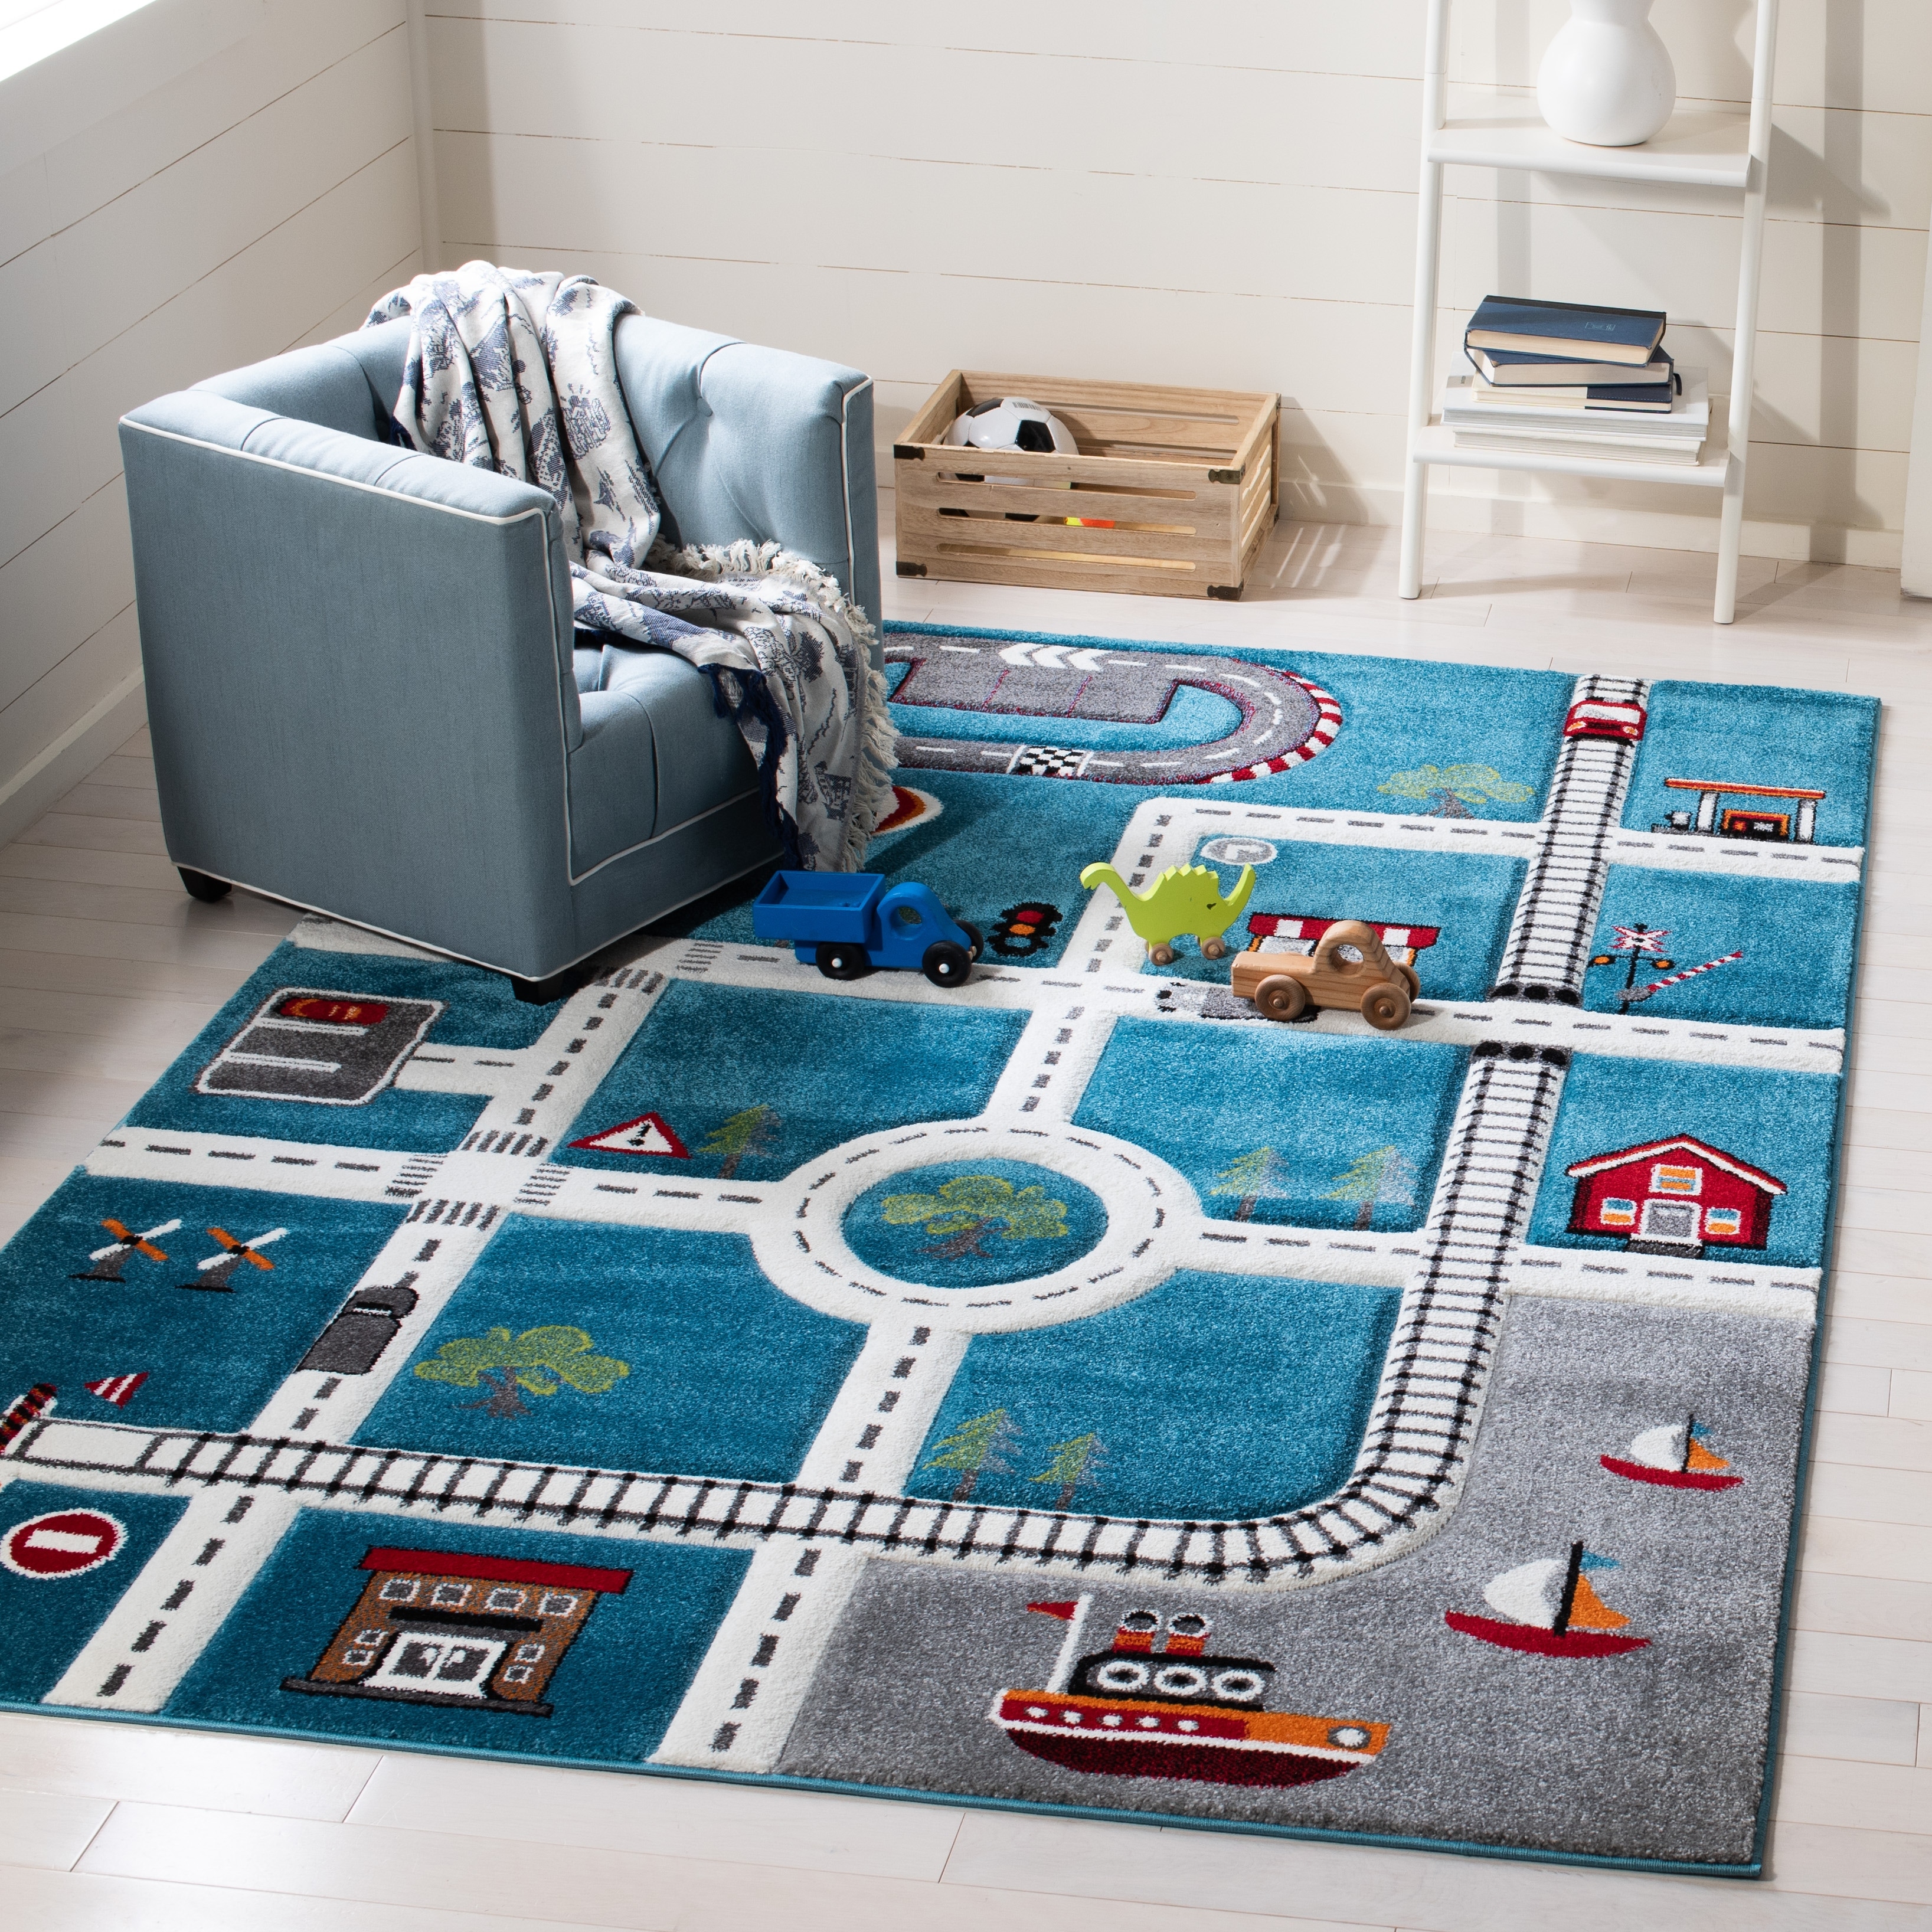 SAFAVIEH Carousel Kids Orpa The Dog Area Rug, Navy/Ivory, 4' x 4' Square 